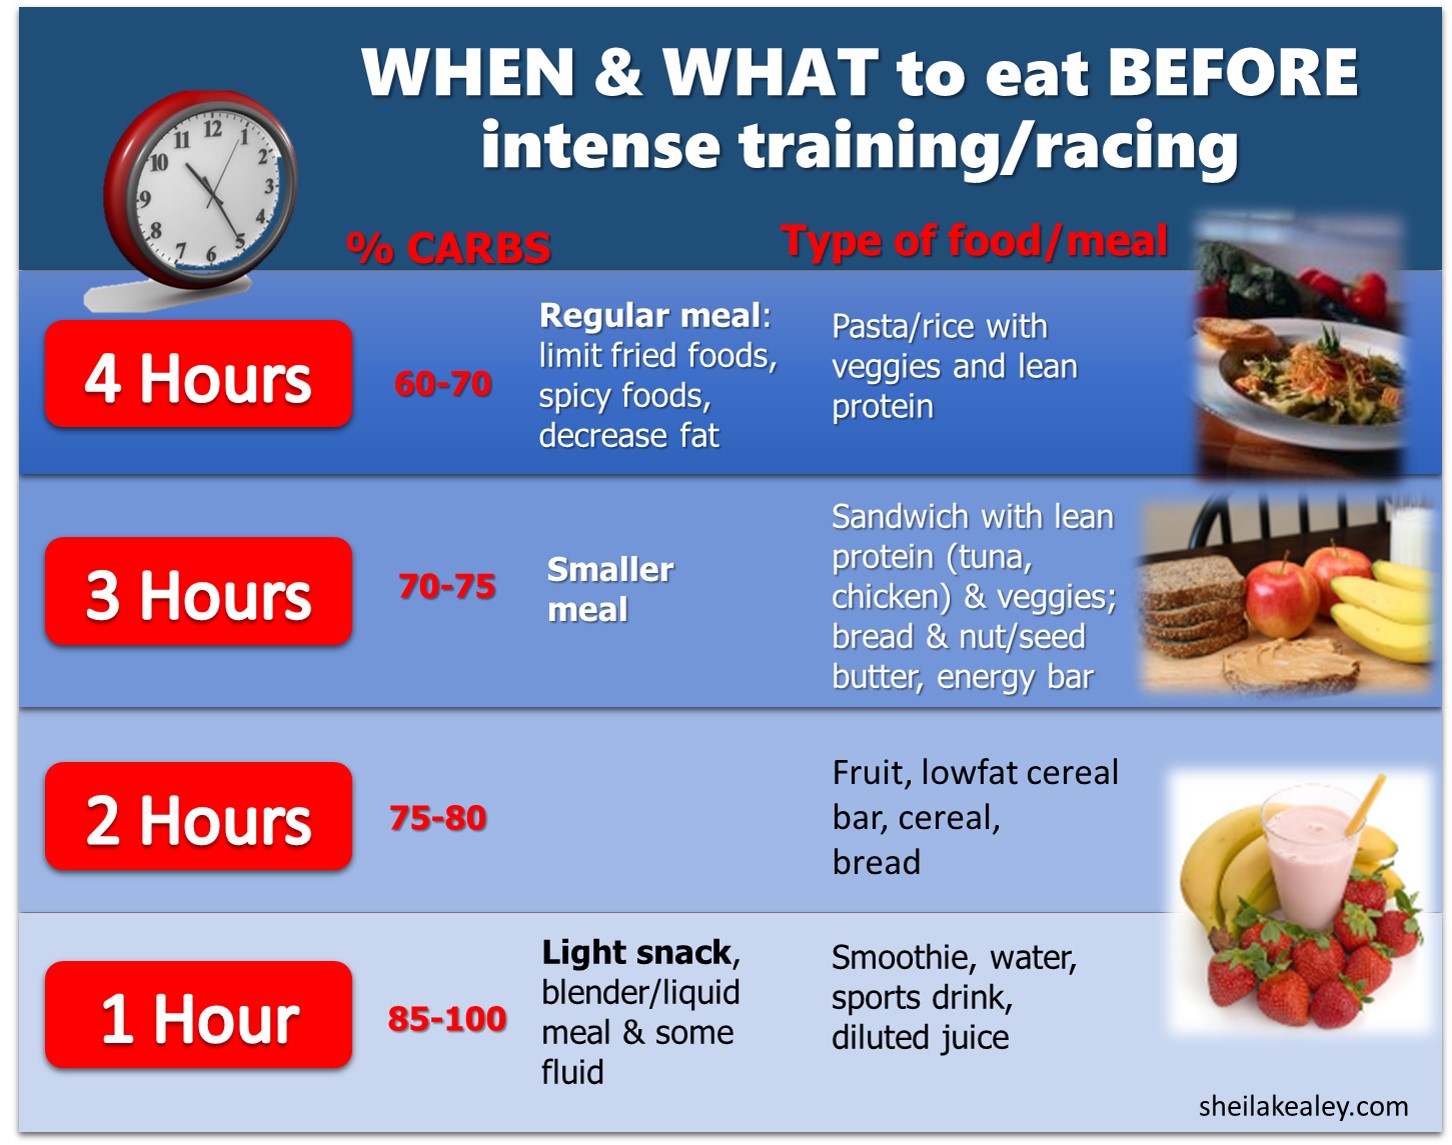 15 Minute Should You Eat Before Or After Working Out To Gain Weight for Women